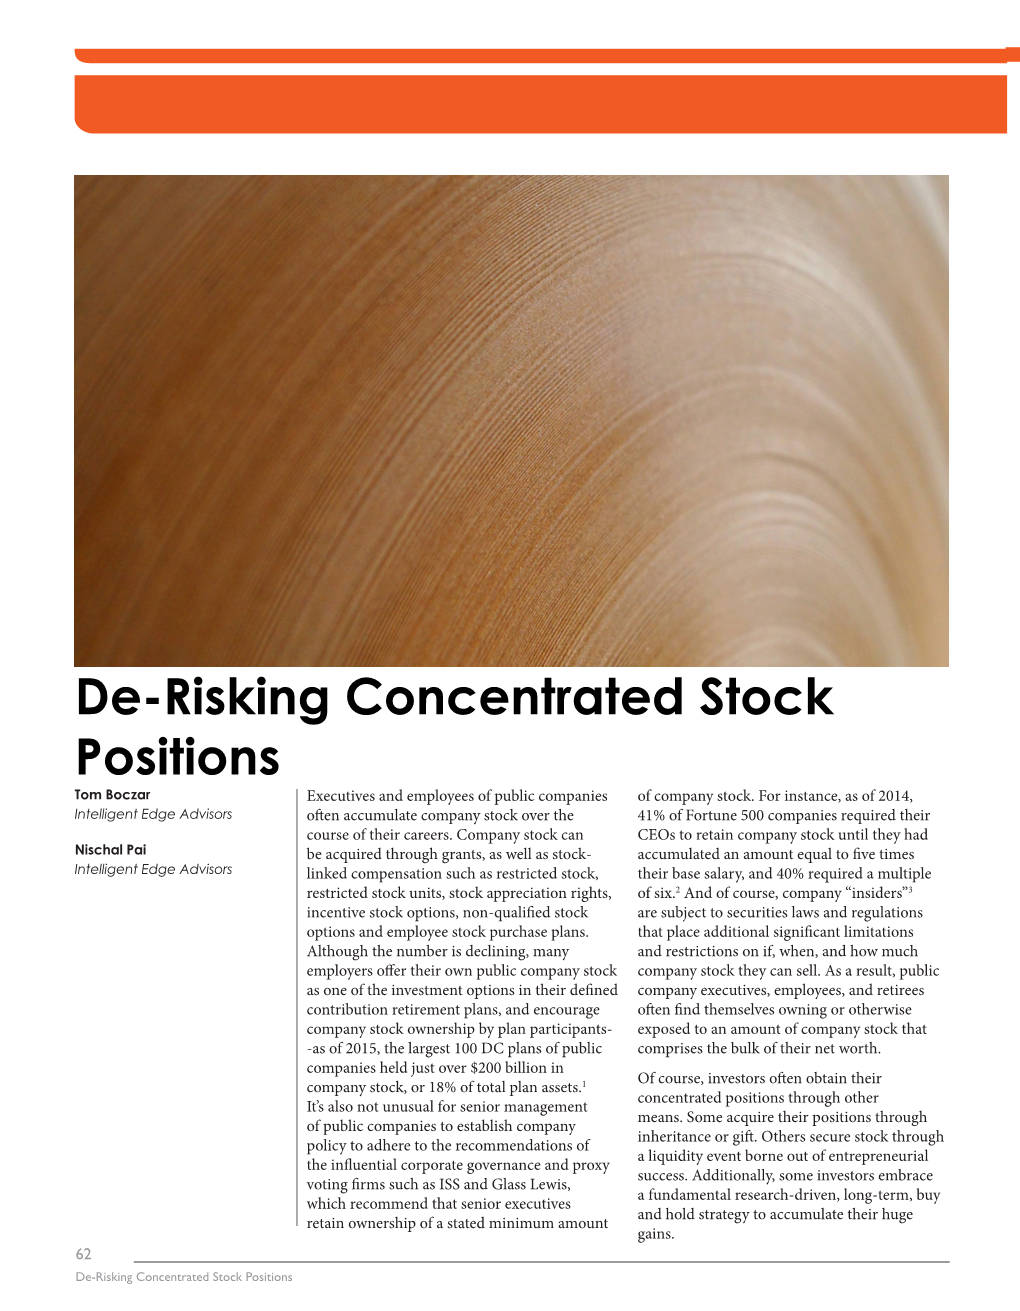 De-Risking Concentrated Stock Positions Tom Boczar Executives and Employees of Public Companies of Company Stock